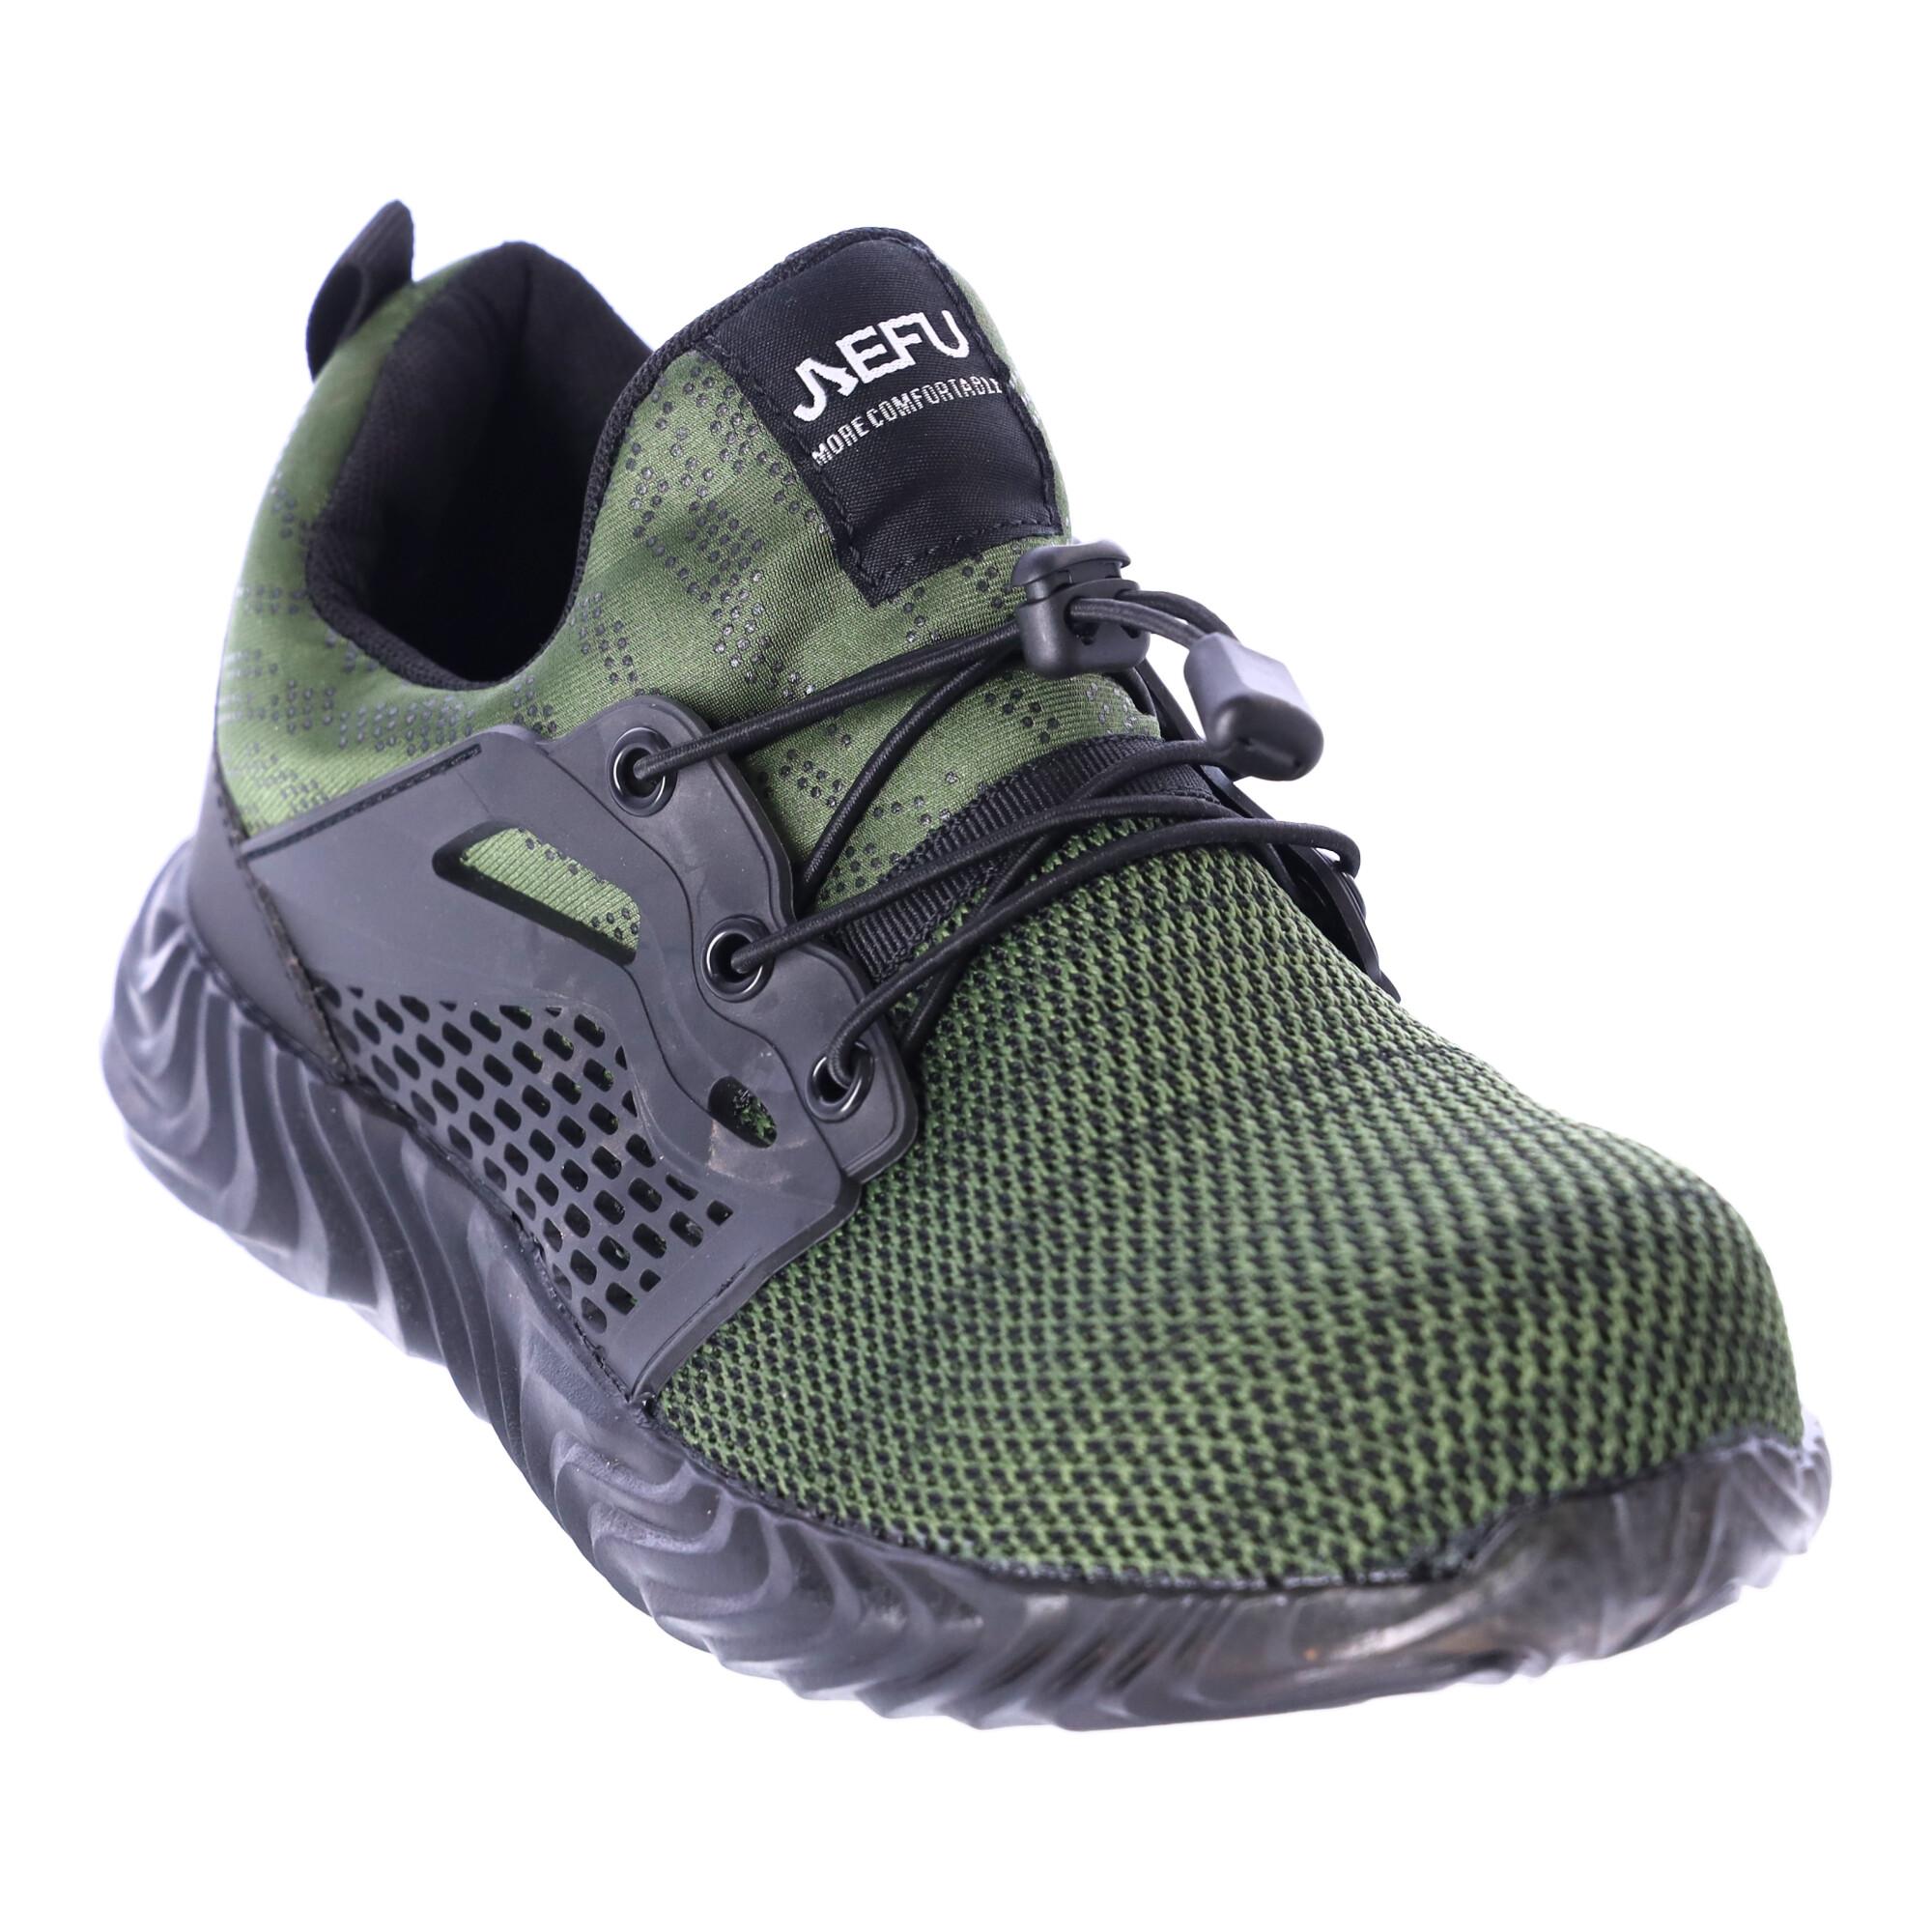 Work safety shoes "46" - green